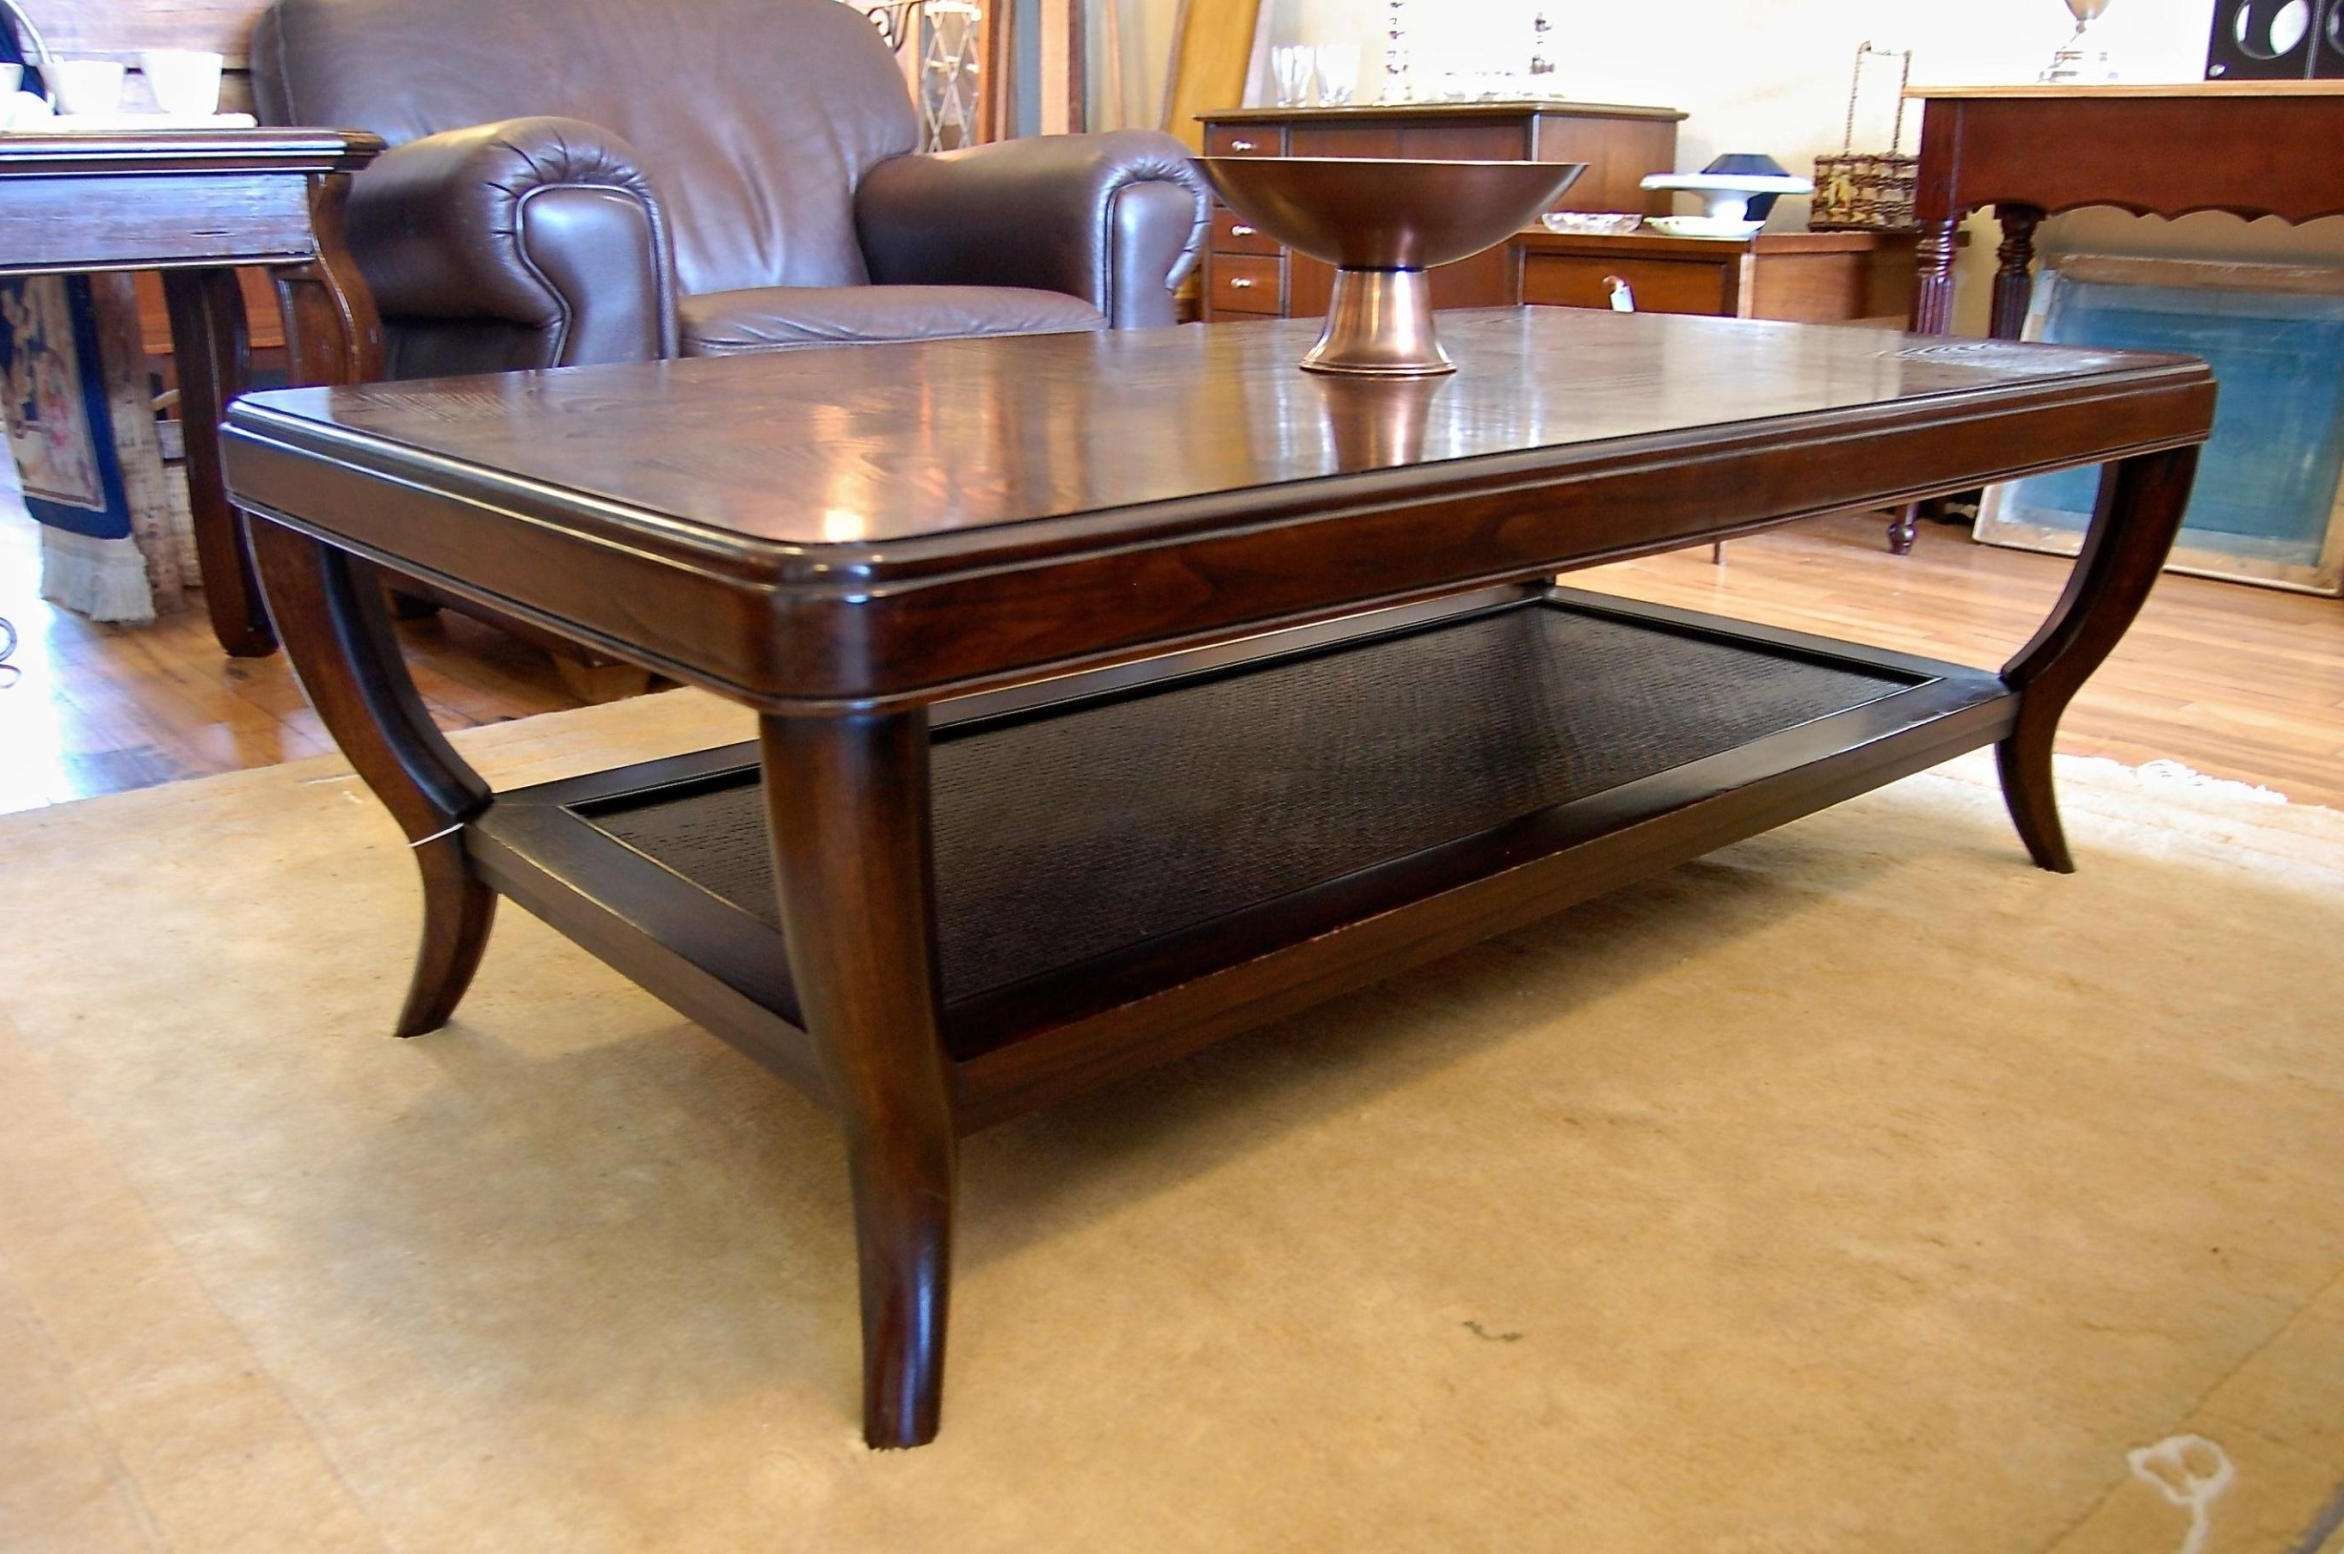 Very Low And Large Oak Coffee Table Make Your Room Even Delicious Throughout Well Known Extra Large Low Coffee Tables (Gallery 20 of 20)